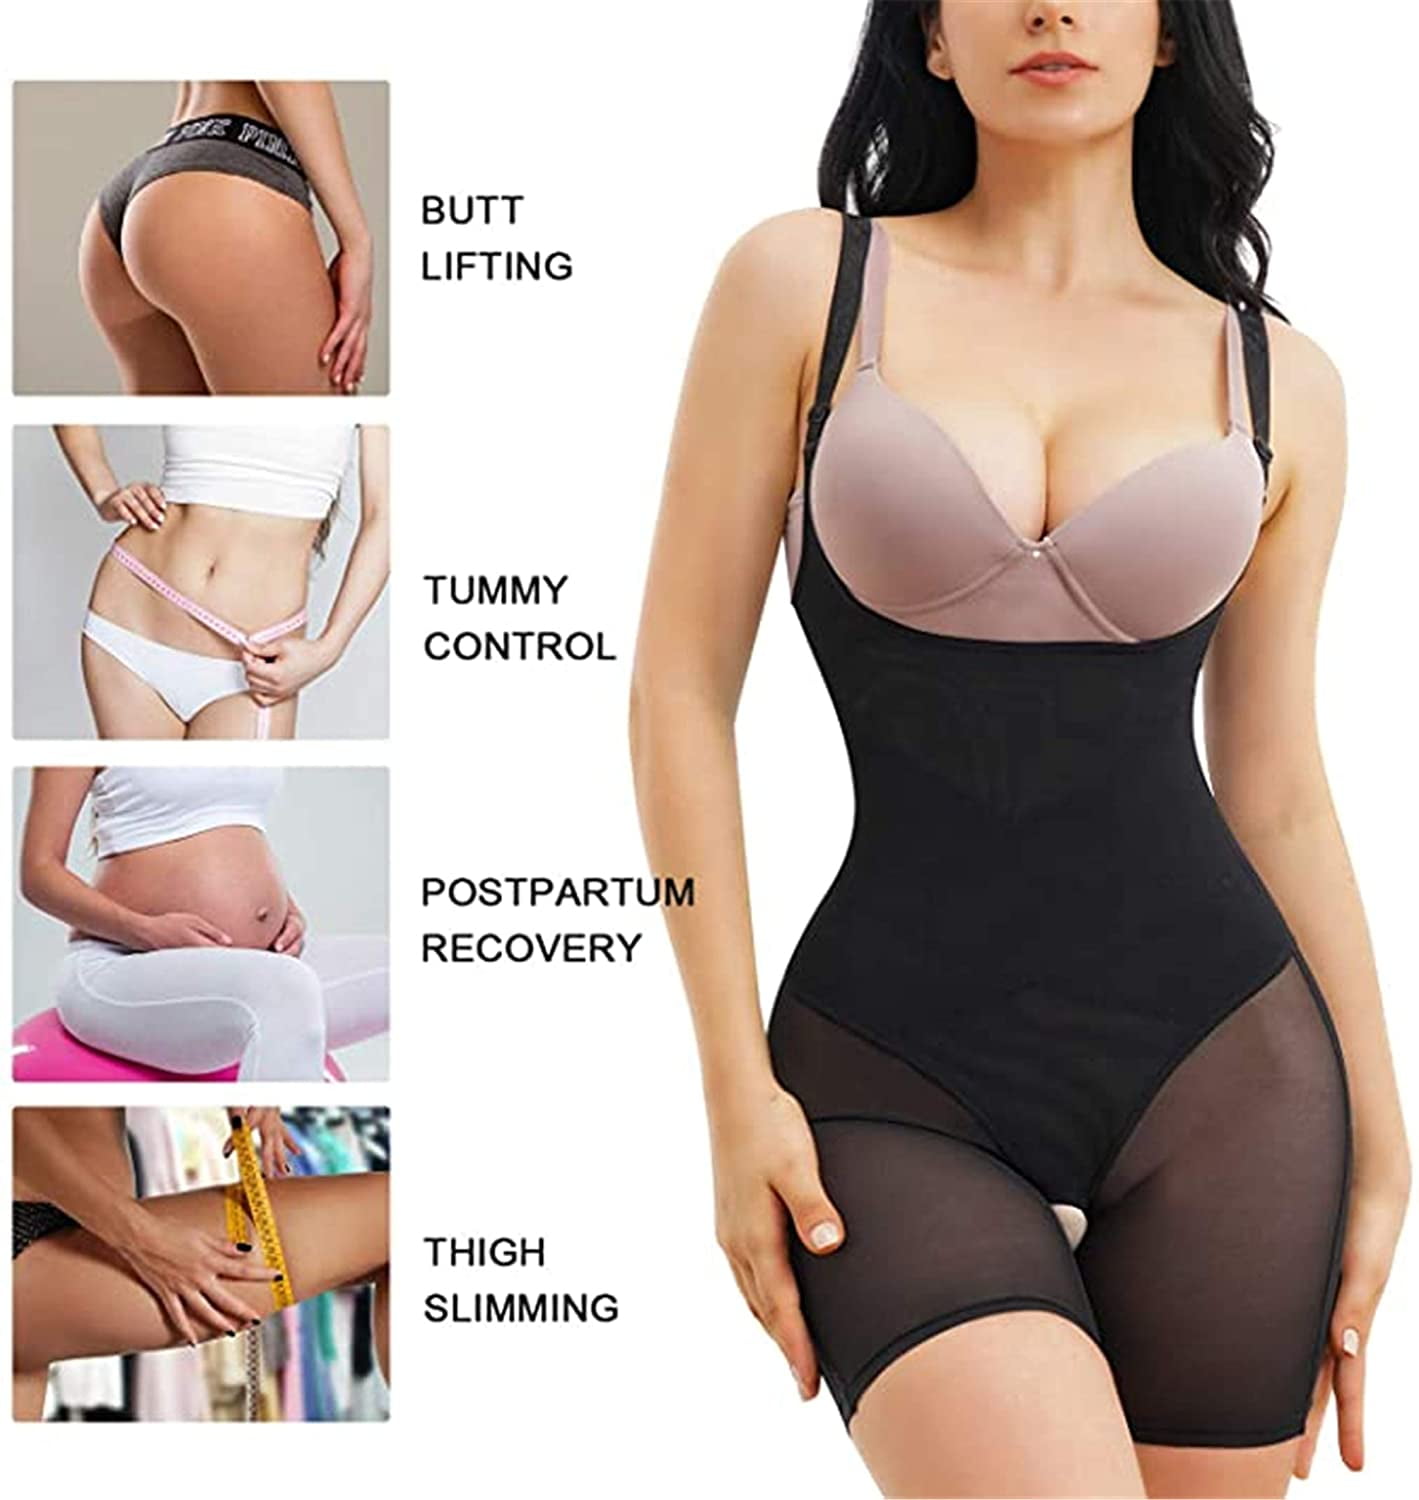 Womens Body Shaper Butt Lifter Tummy Control Waist Shapewear Crotchless  Slimming Bodysuit With Zipper Powernet Thigh Slimmer Y200706 From Luo01,  $50.7